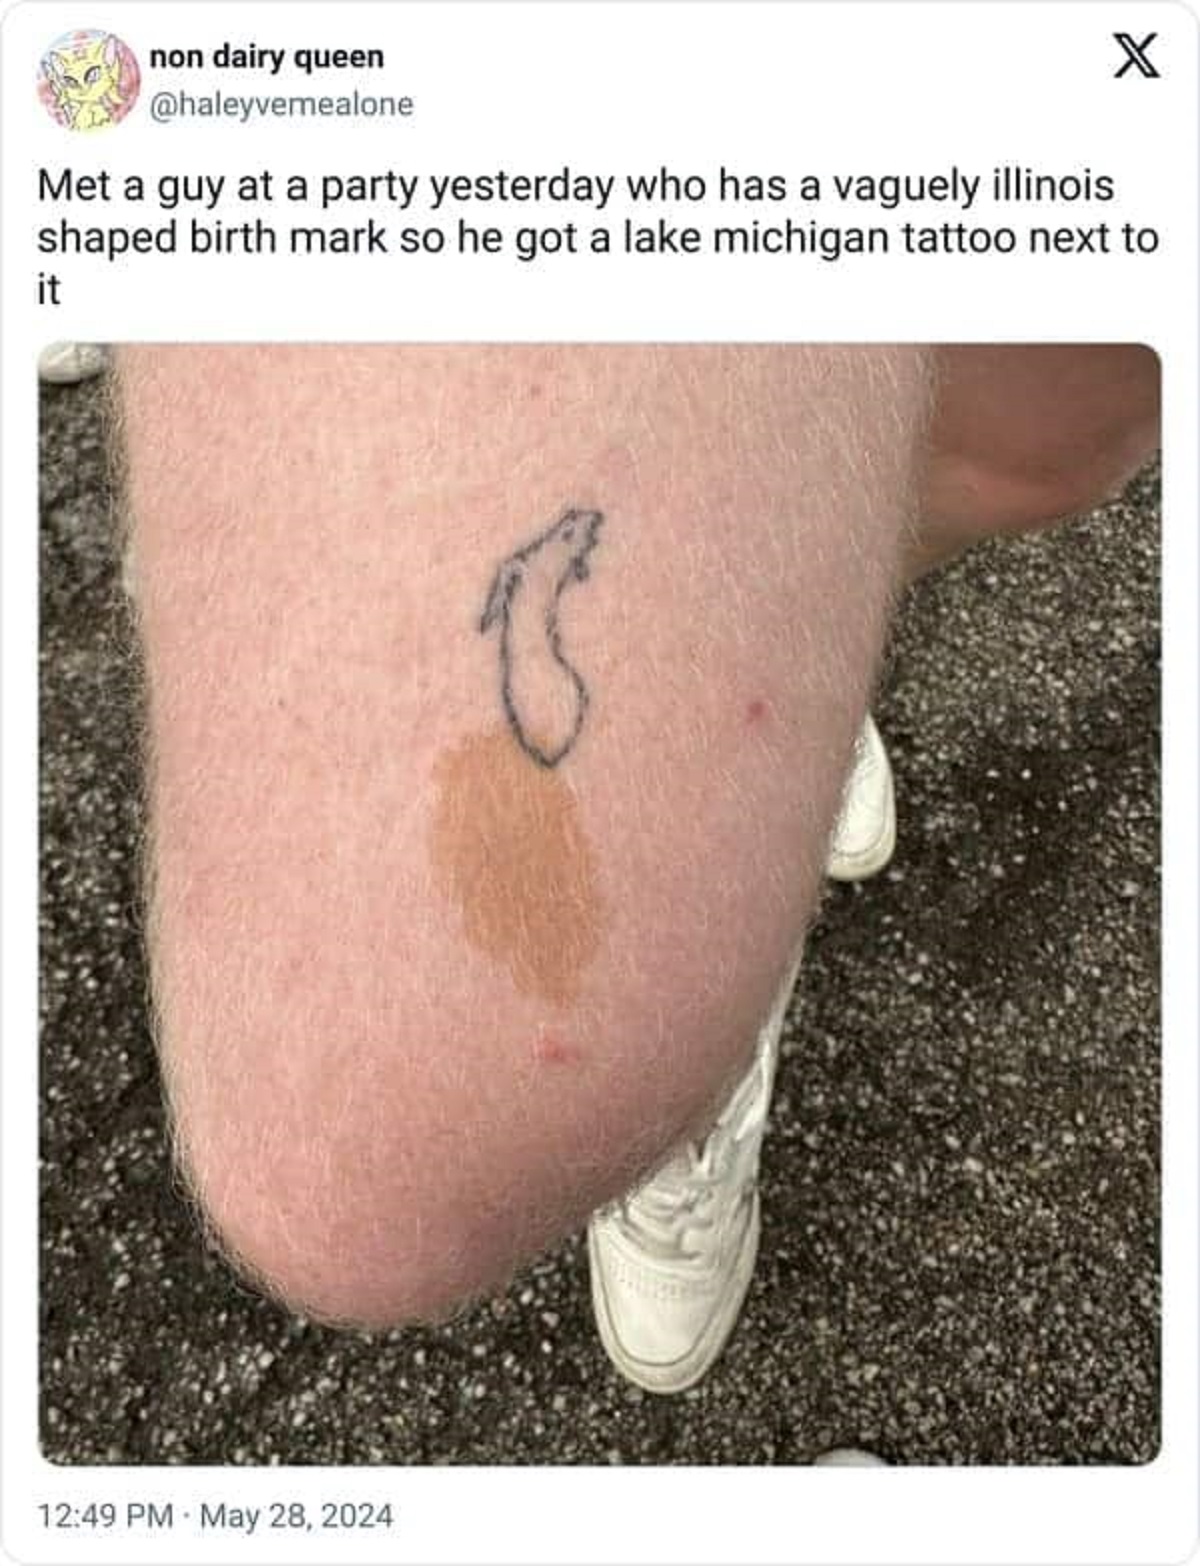 tattoo - non dairy queen X Met a guy at a party yesterday who has a vaguely illinois. shaped birth mark so he got a lake michigan tattoo next to it 8